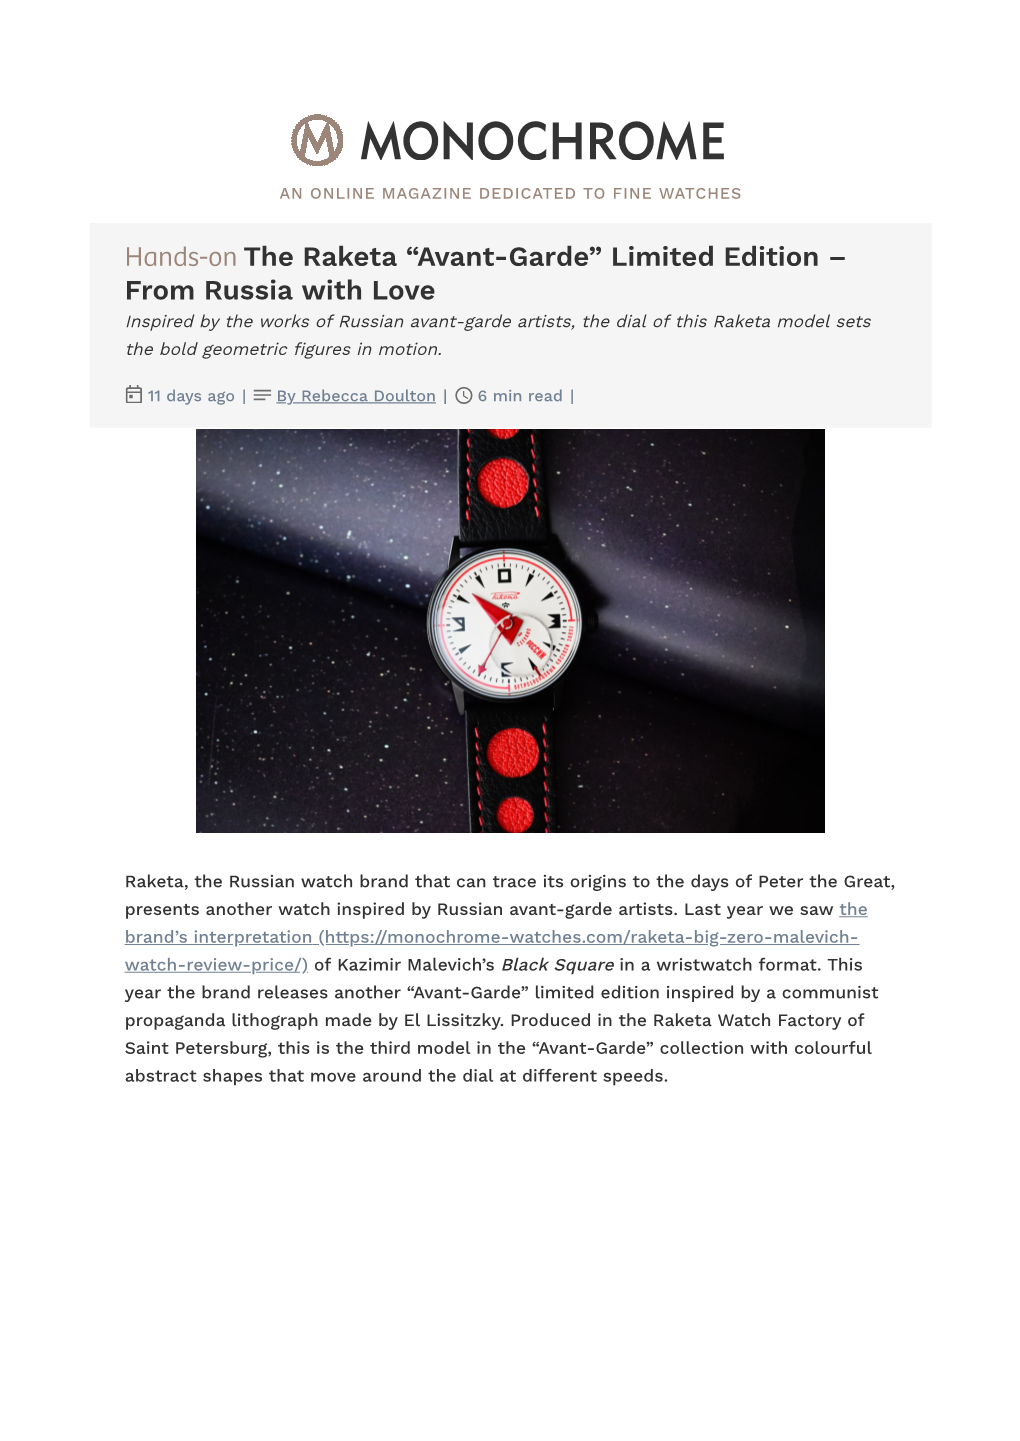 Hands-On the Raketa “Avant-Garde” Limited Edition – from Russia With